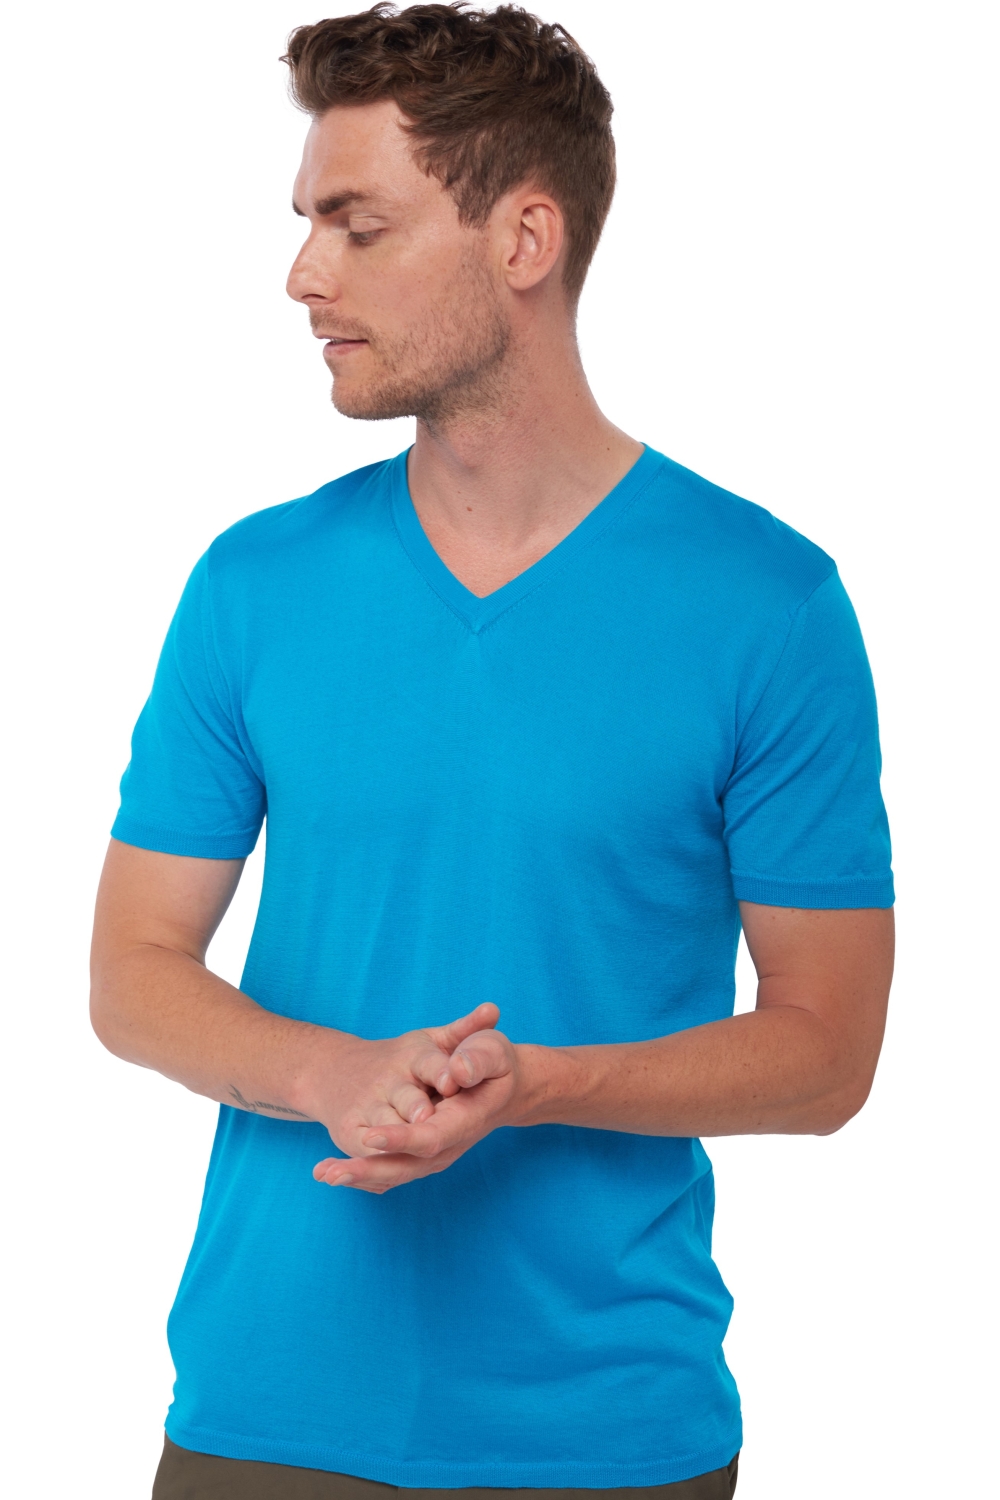 Coton Giza 45 pull homme col v michael turquoise s